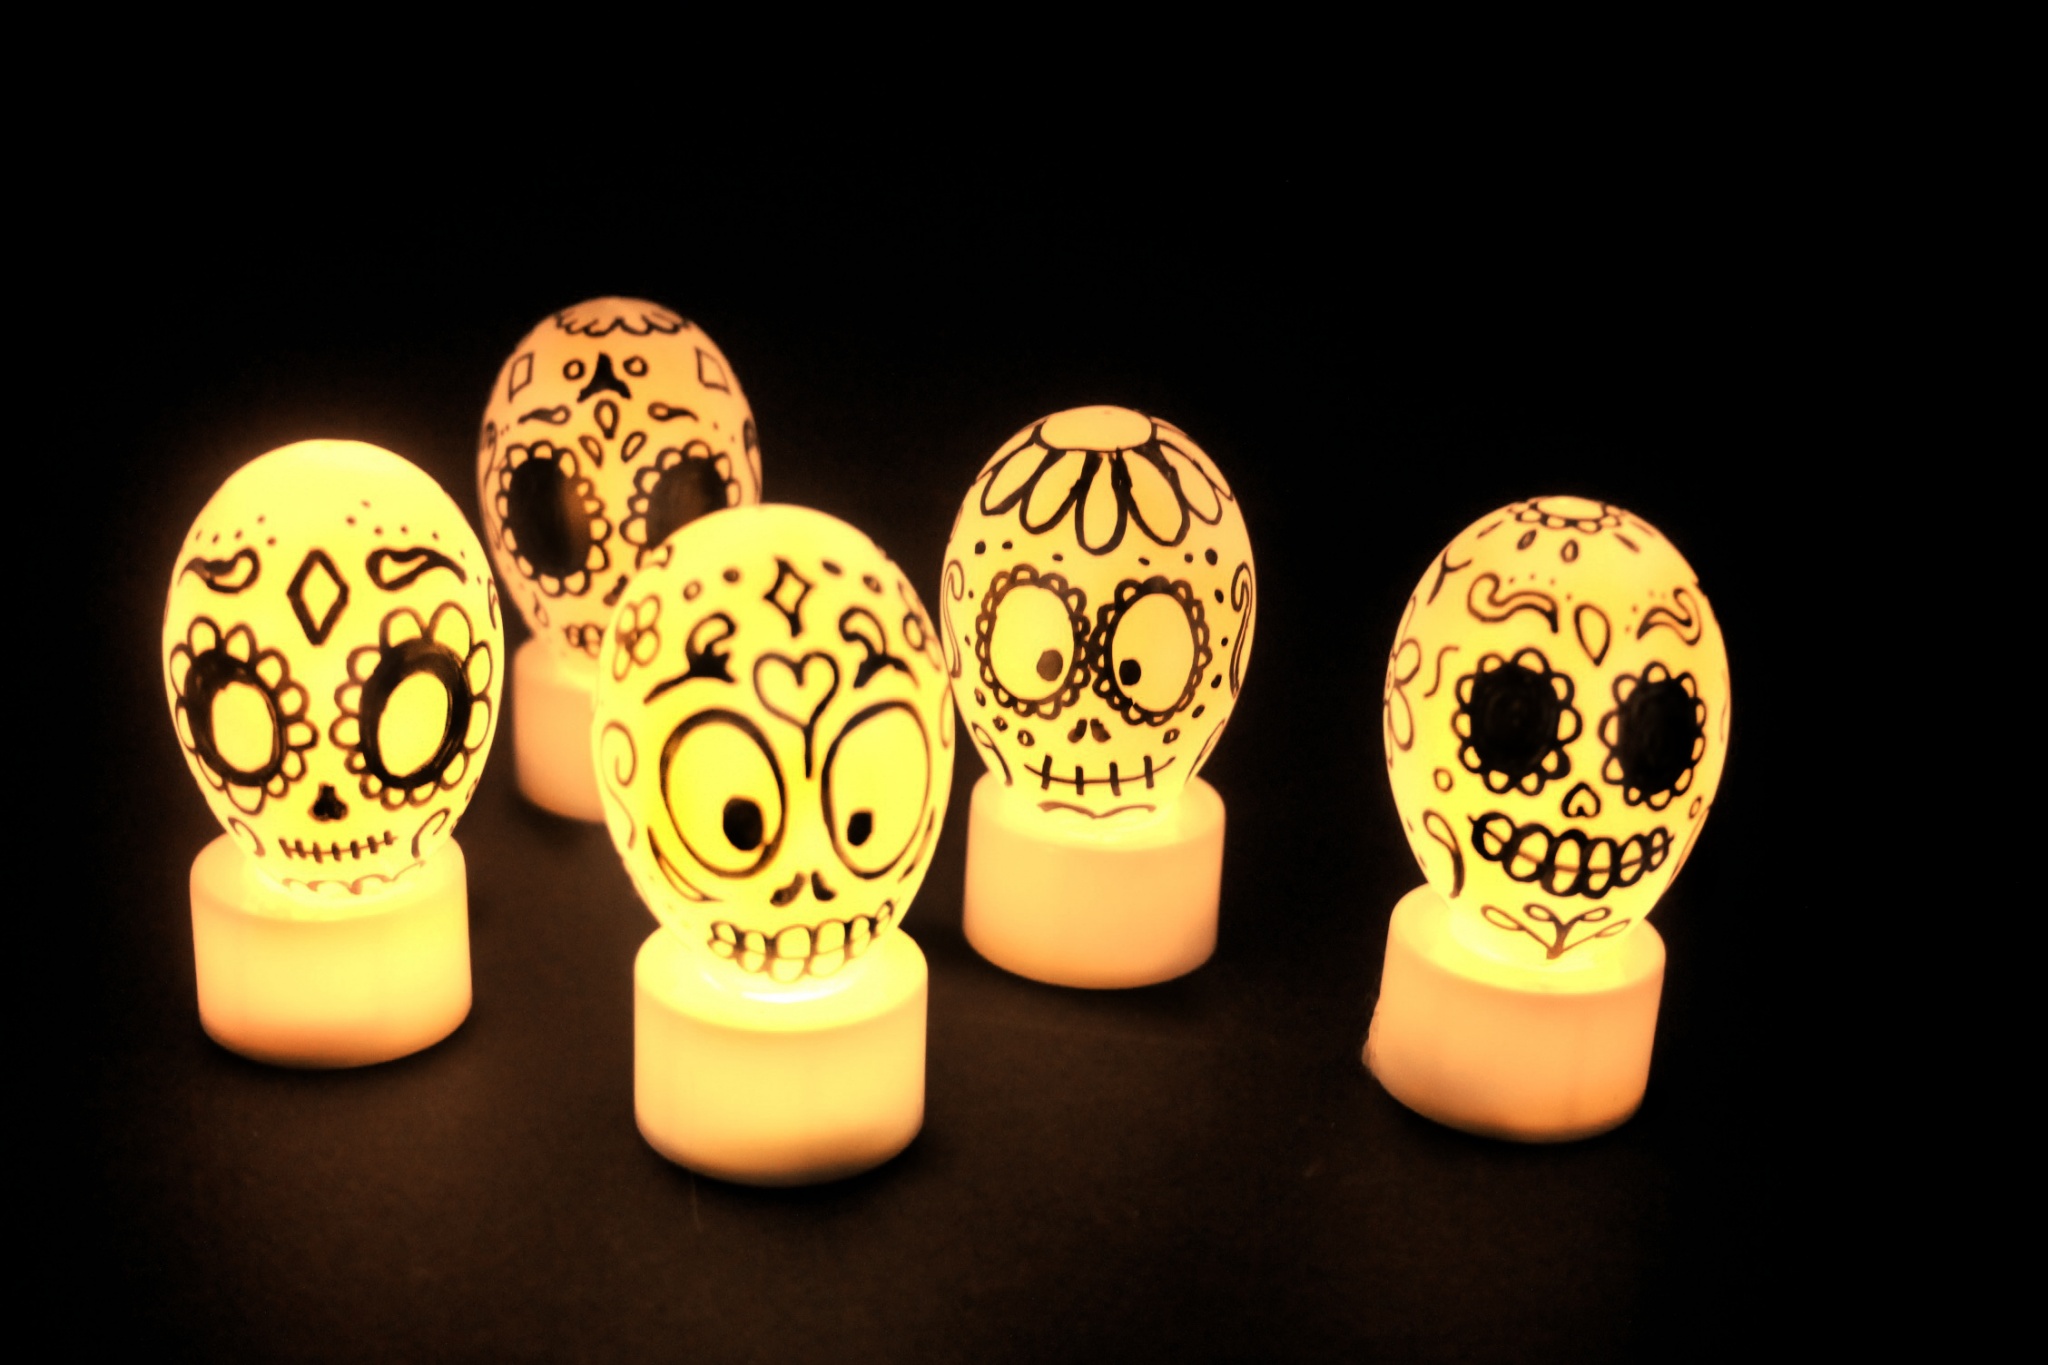 Day of the dead glowing decorations for Halloween